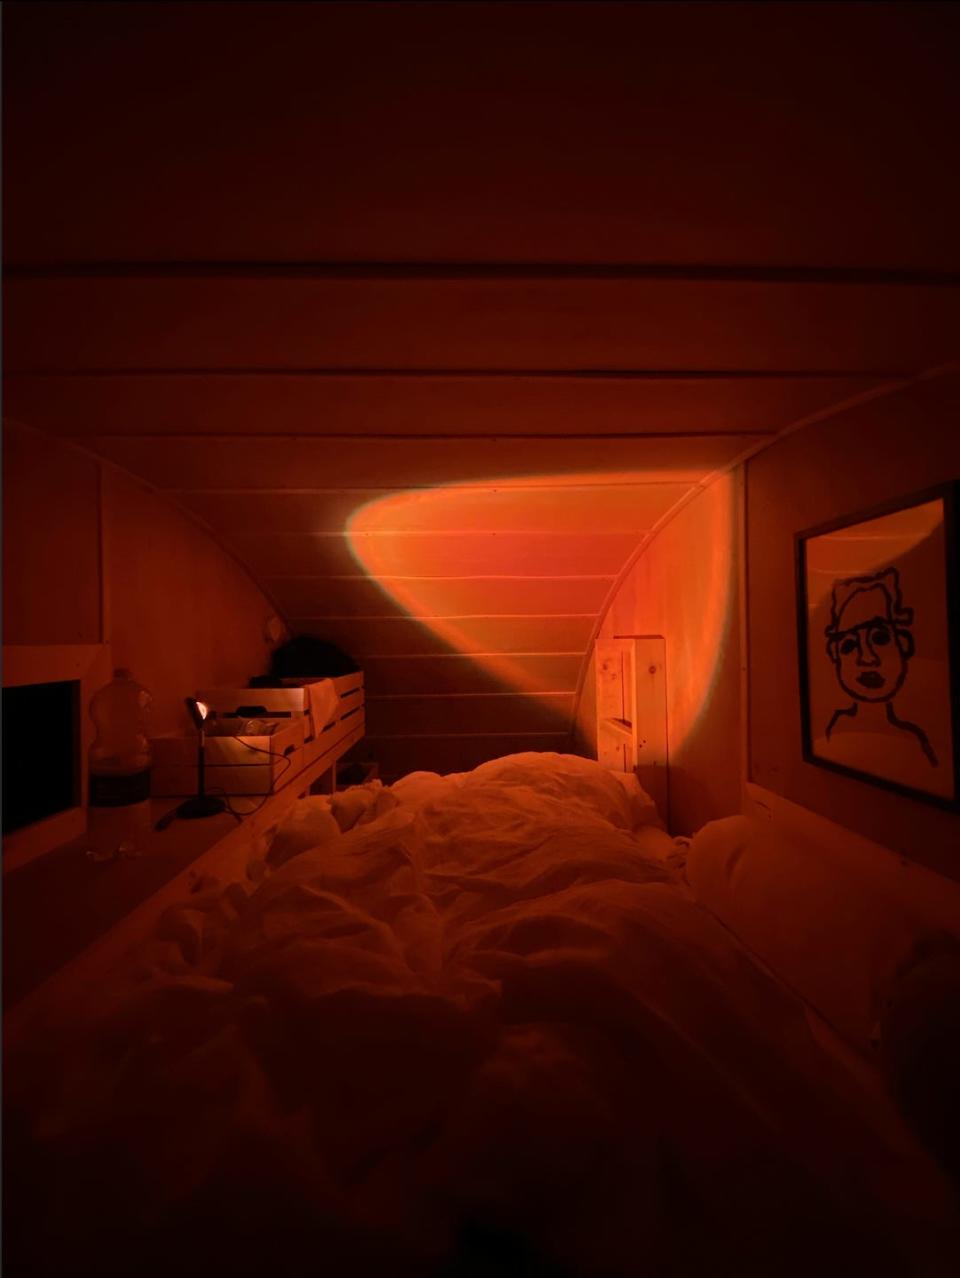 A view from the mezzanine bed at night with a red battery powered light